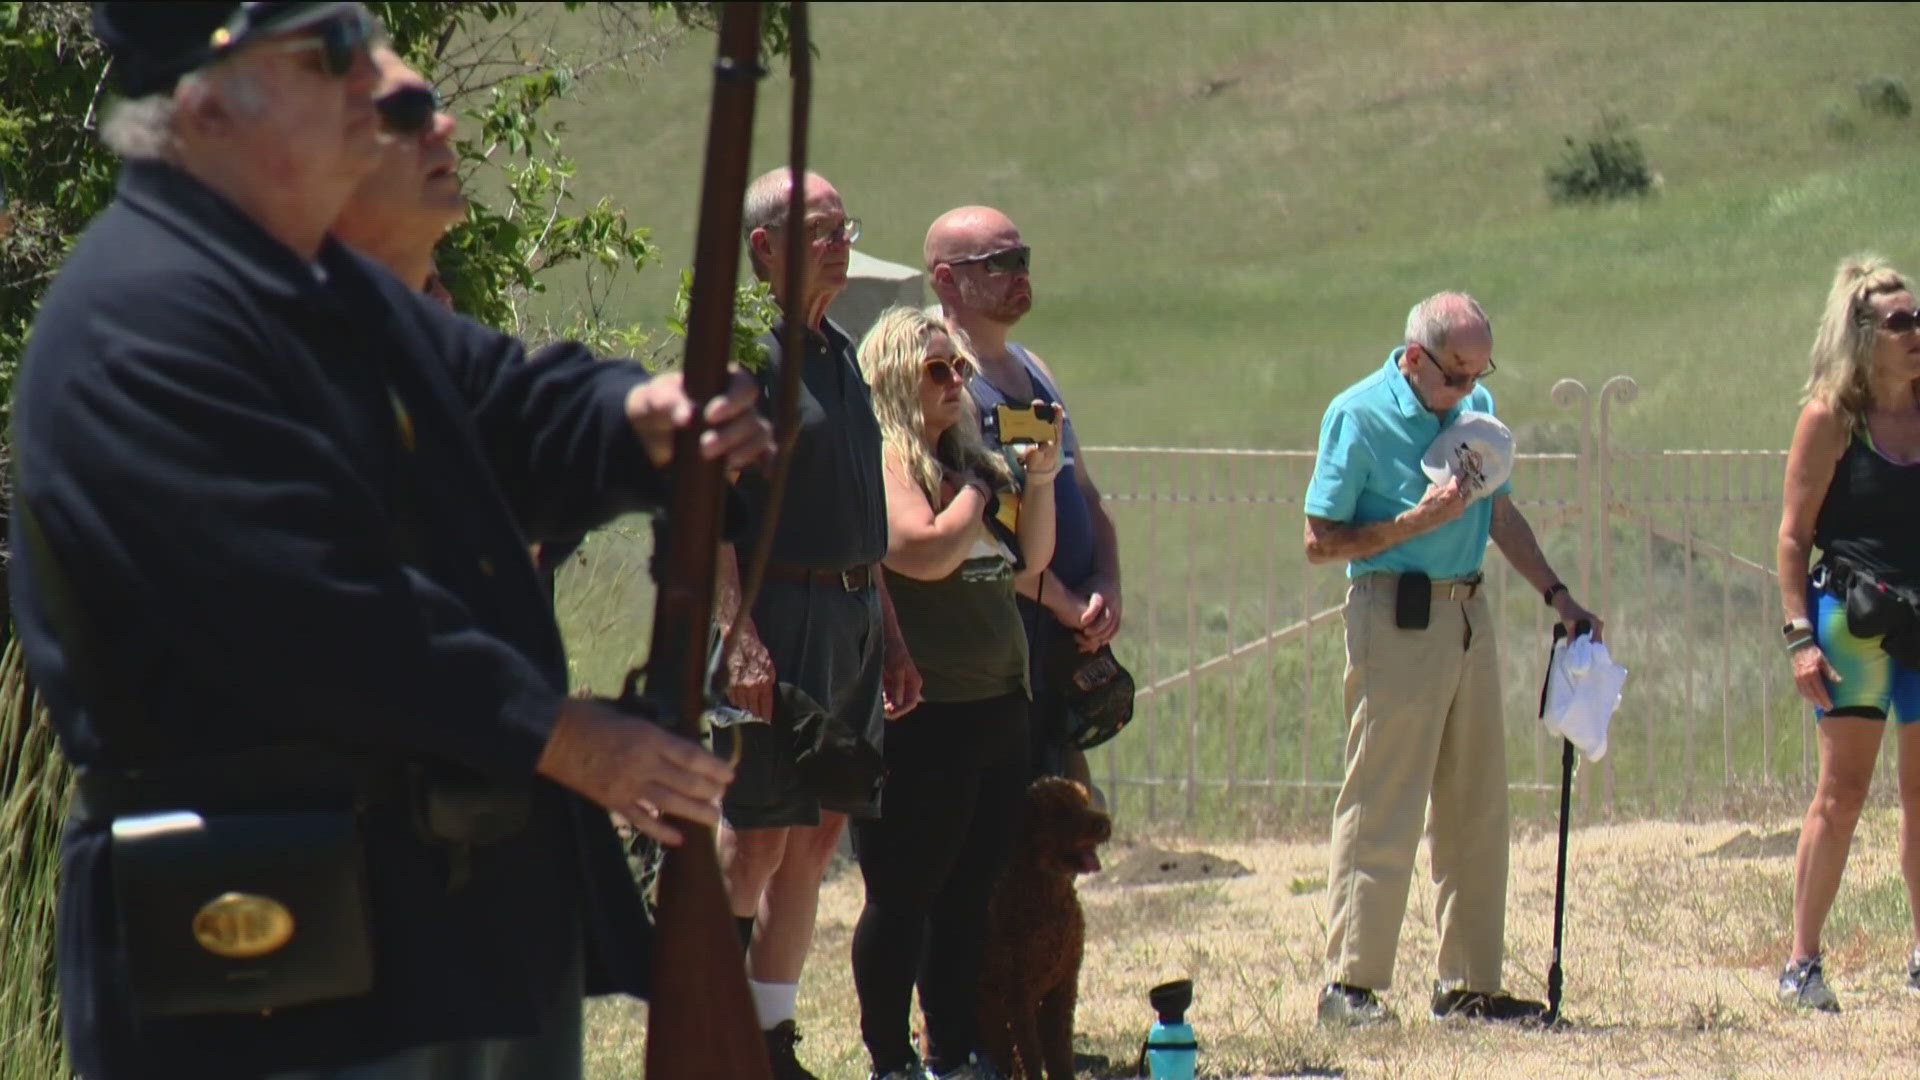 The annual event held by the Idaho Civil War Volunteers included a 21-gun salute and the playing of the taps.